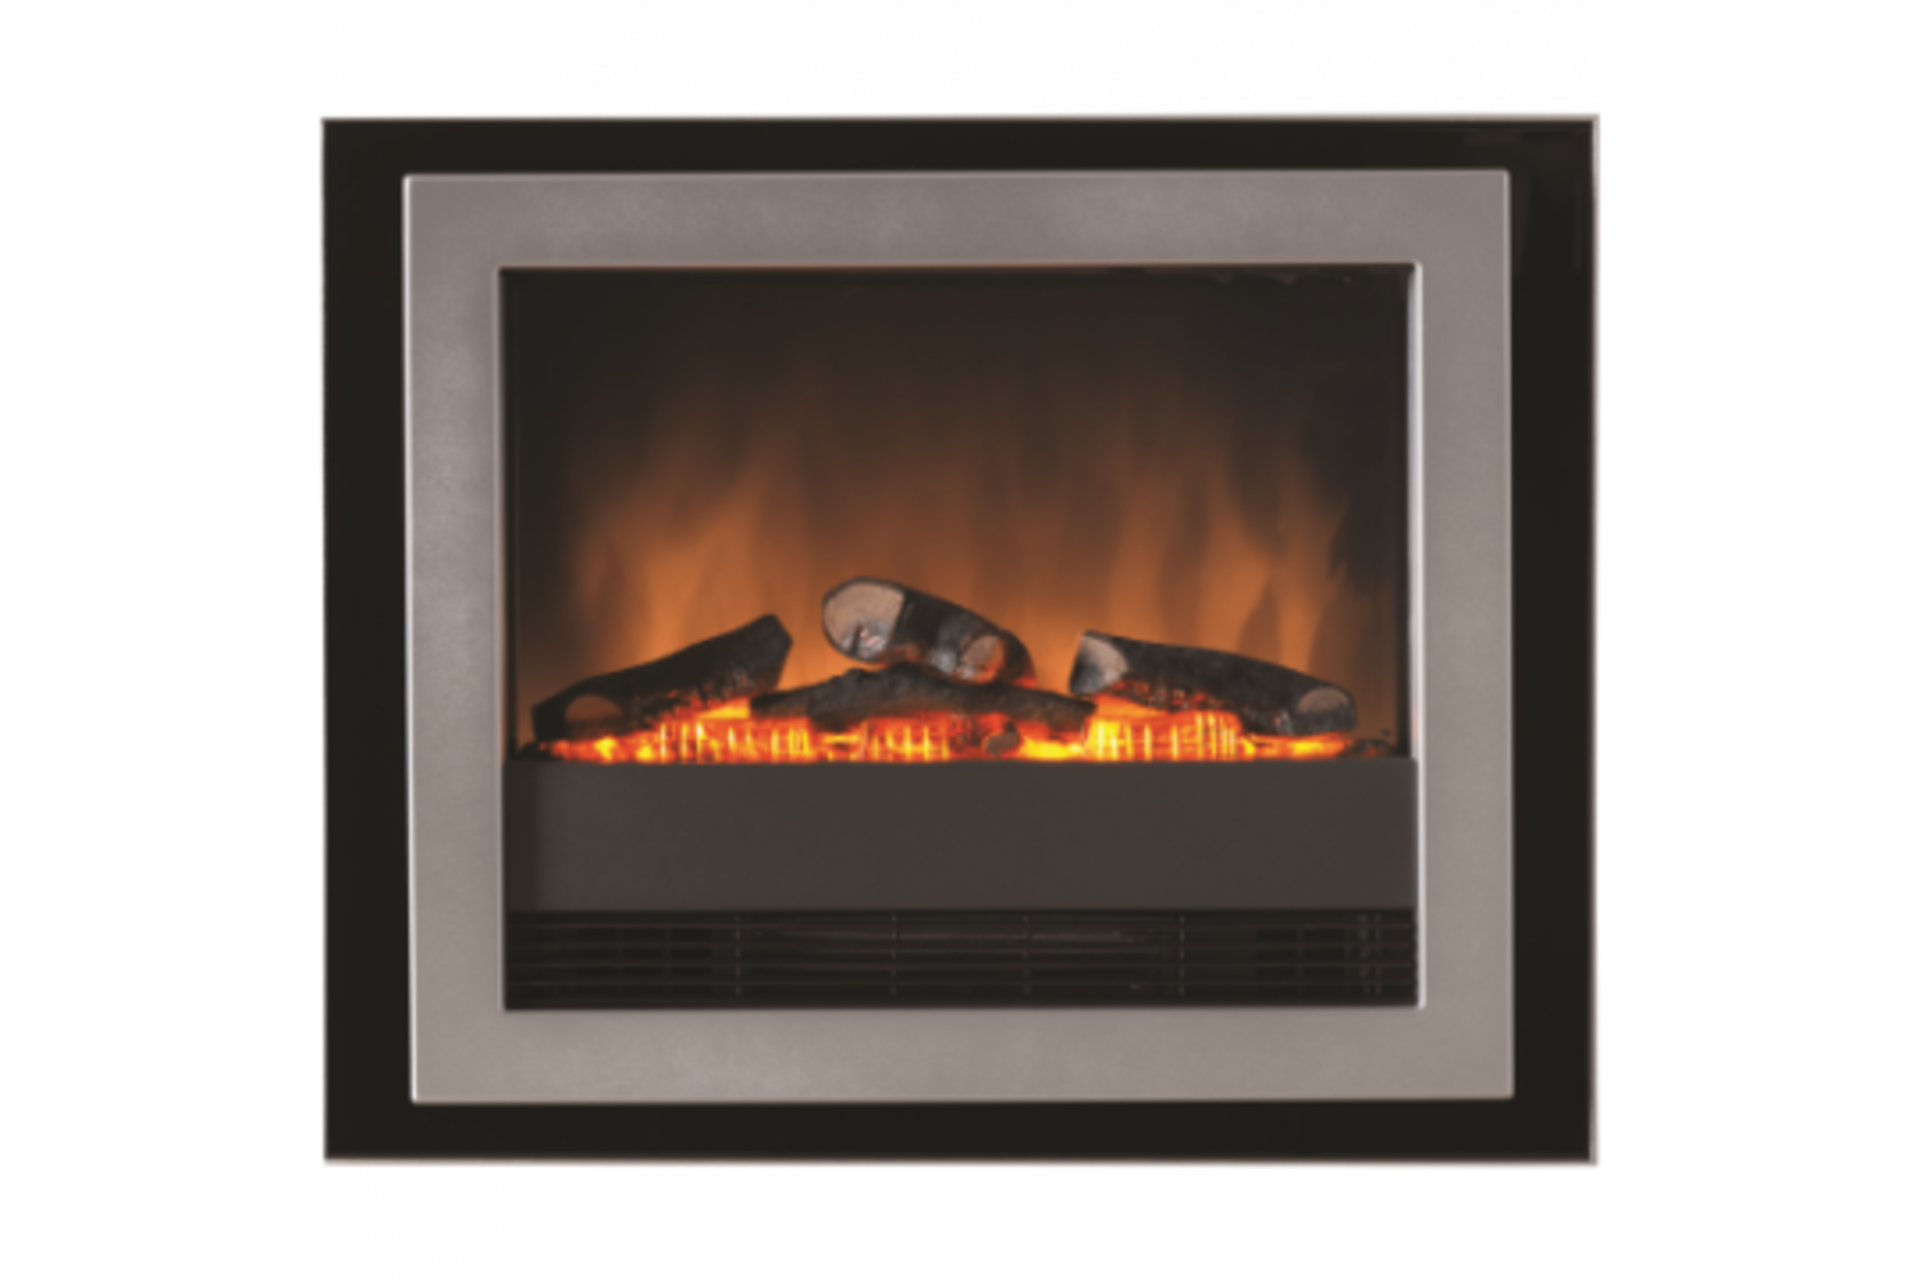 TRADE LOT 3 x New Boxed - Valor Aspire Electric Fire. RRP £499.99 each. Contemporary Electric Wall